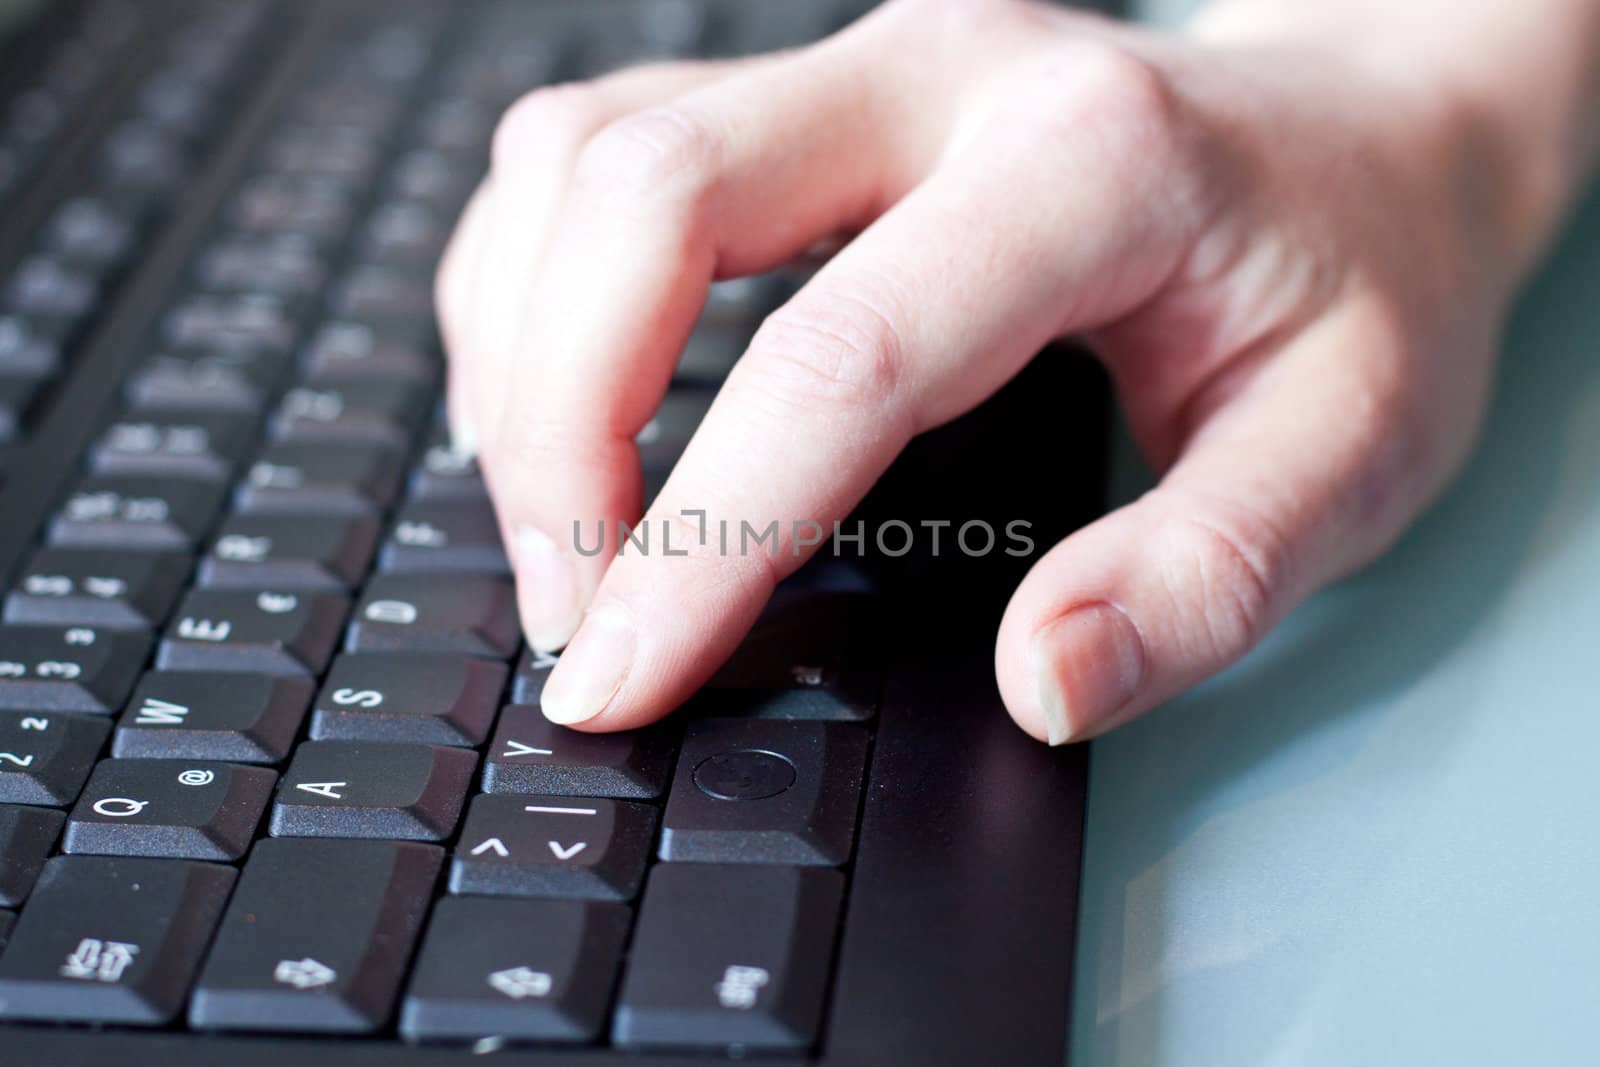 womans hand on a coumputer keyboard